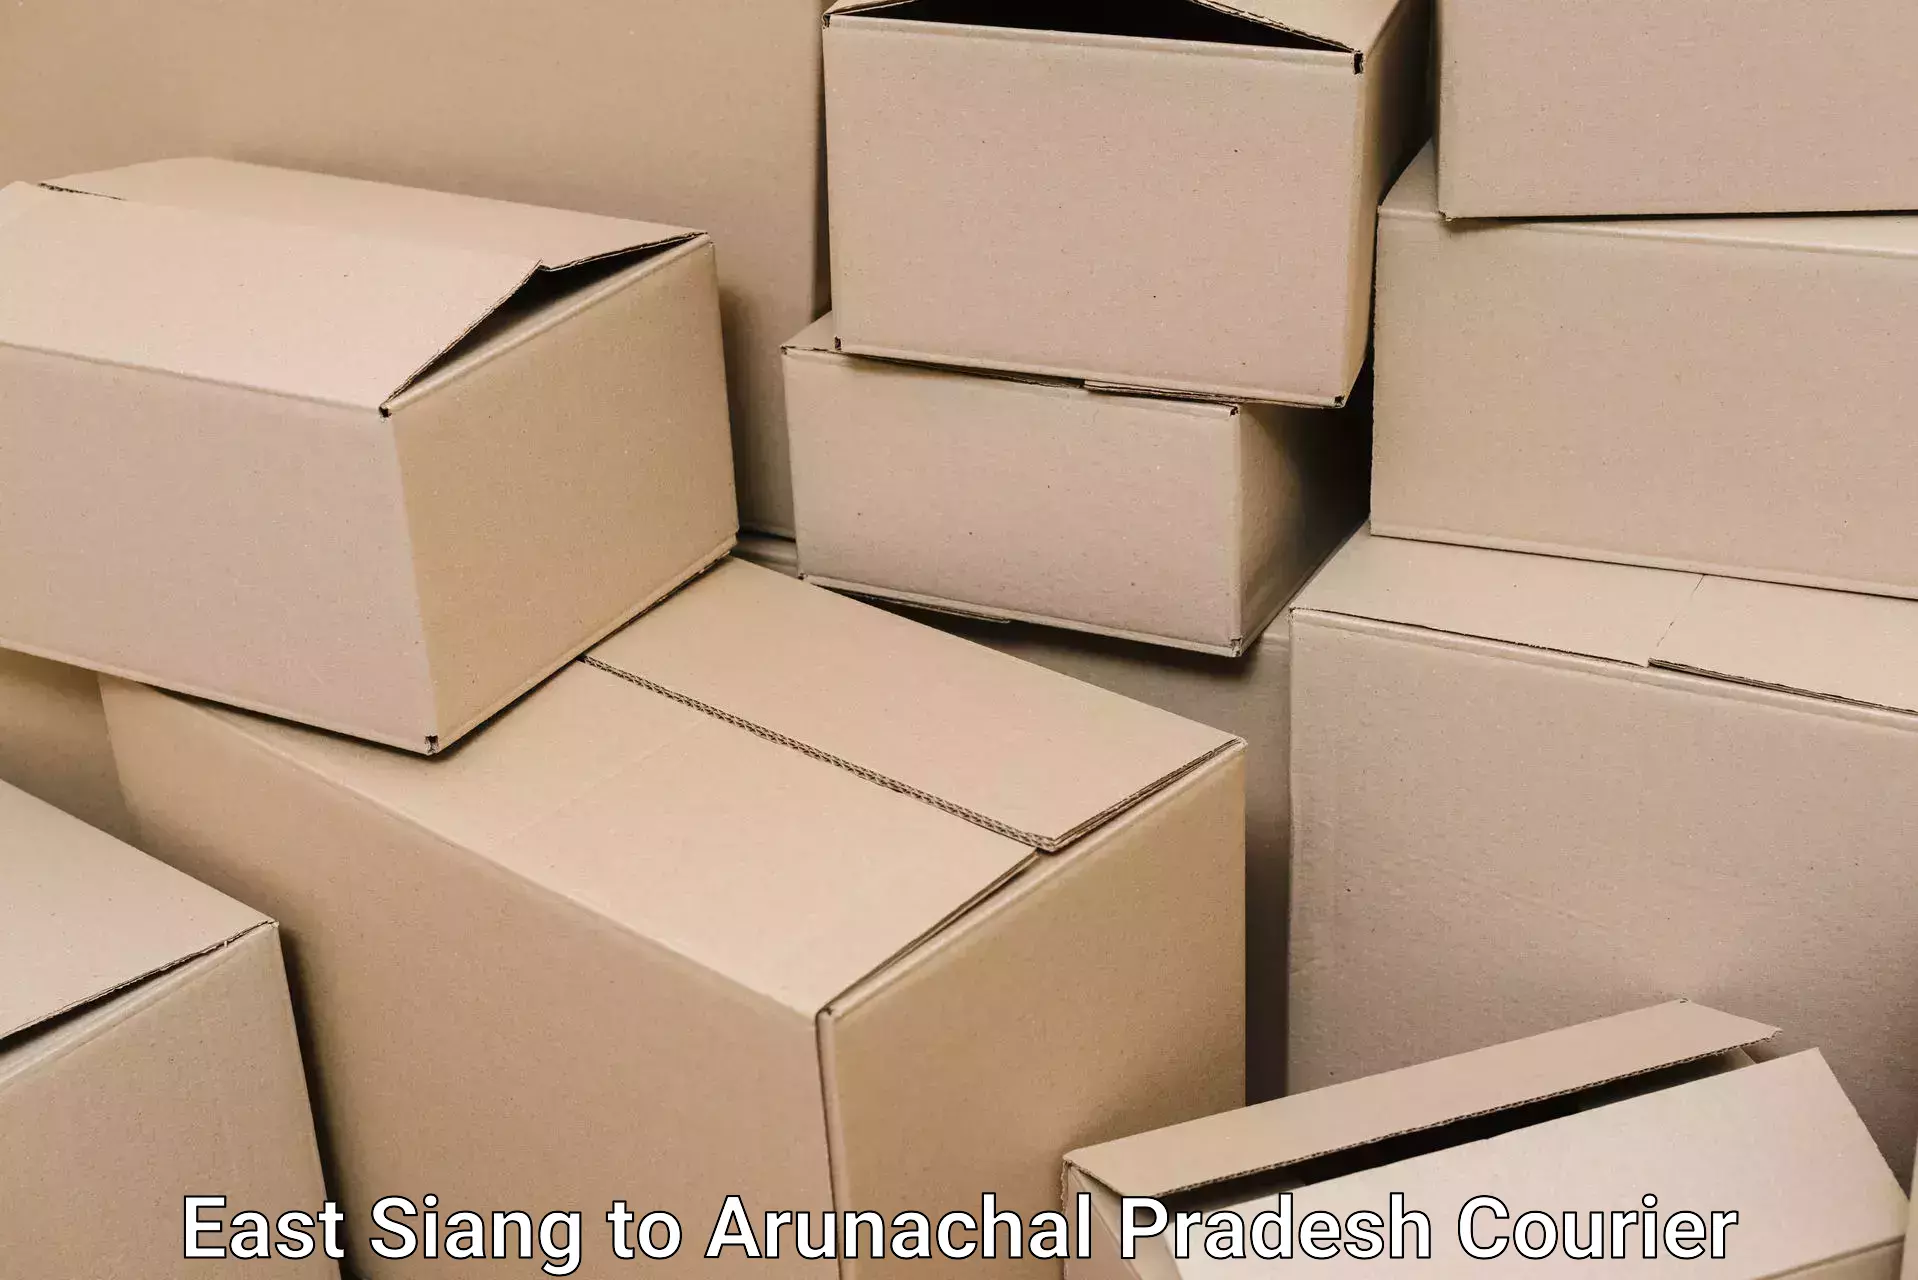 Furniture transport specialists East Siang to Arunachal Pradesh